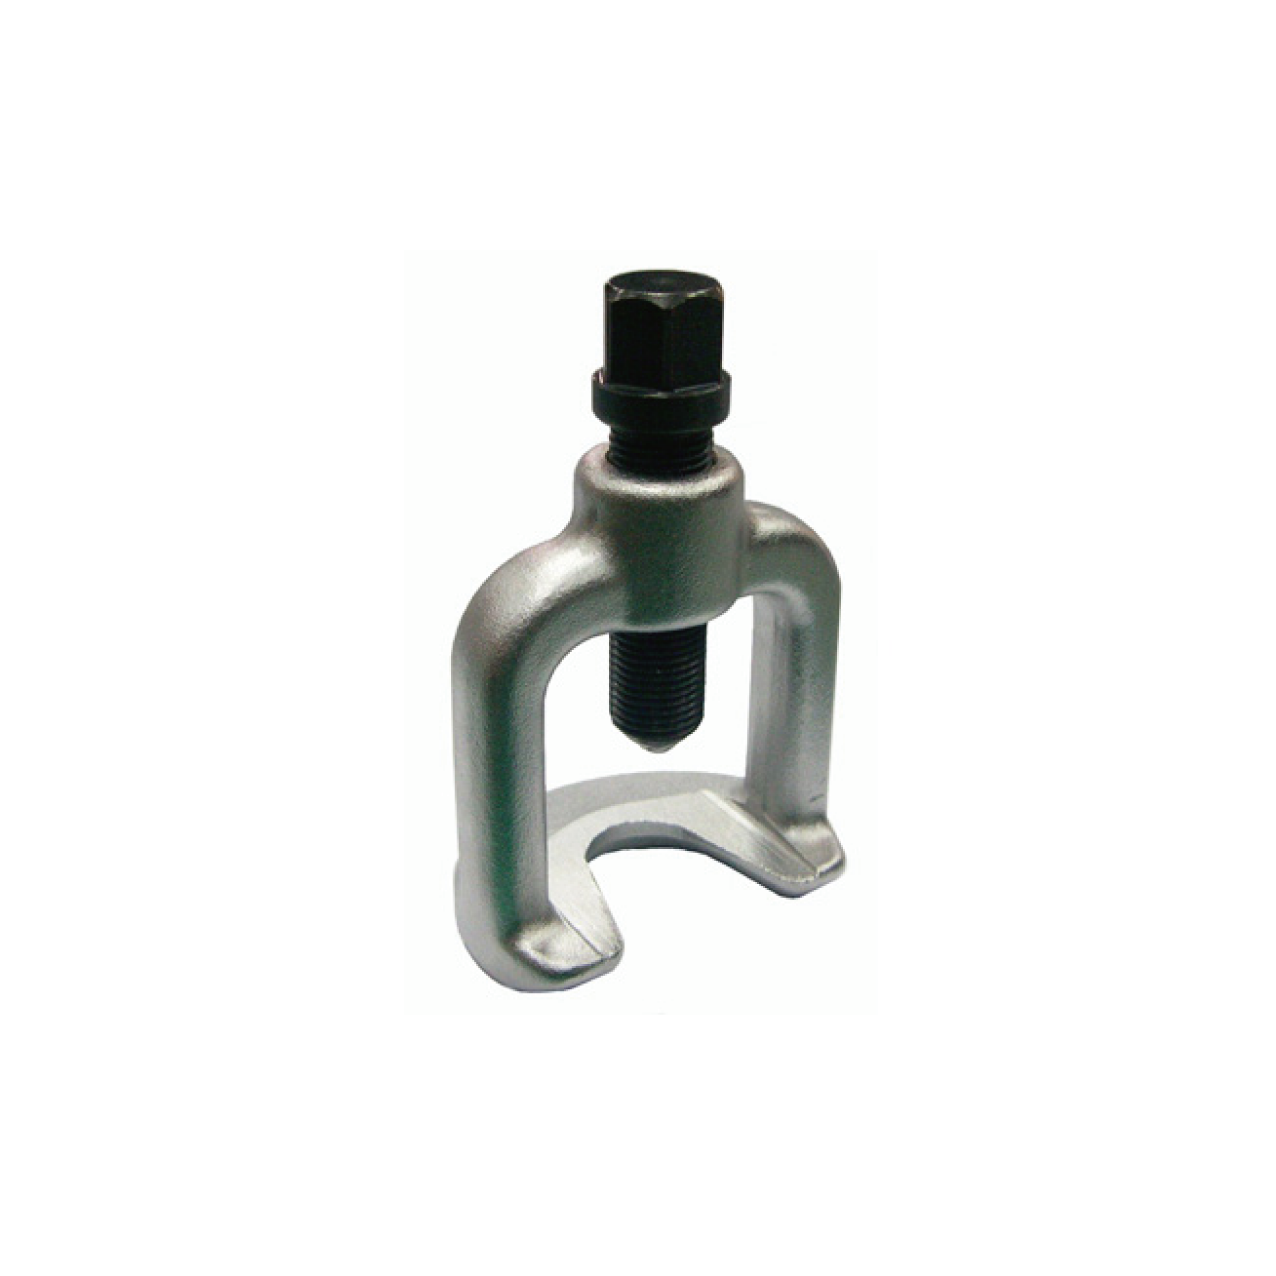 BALL JOINT SEPARATOR (23mm)